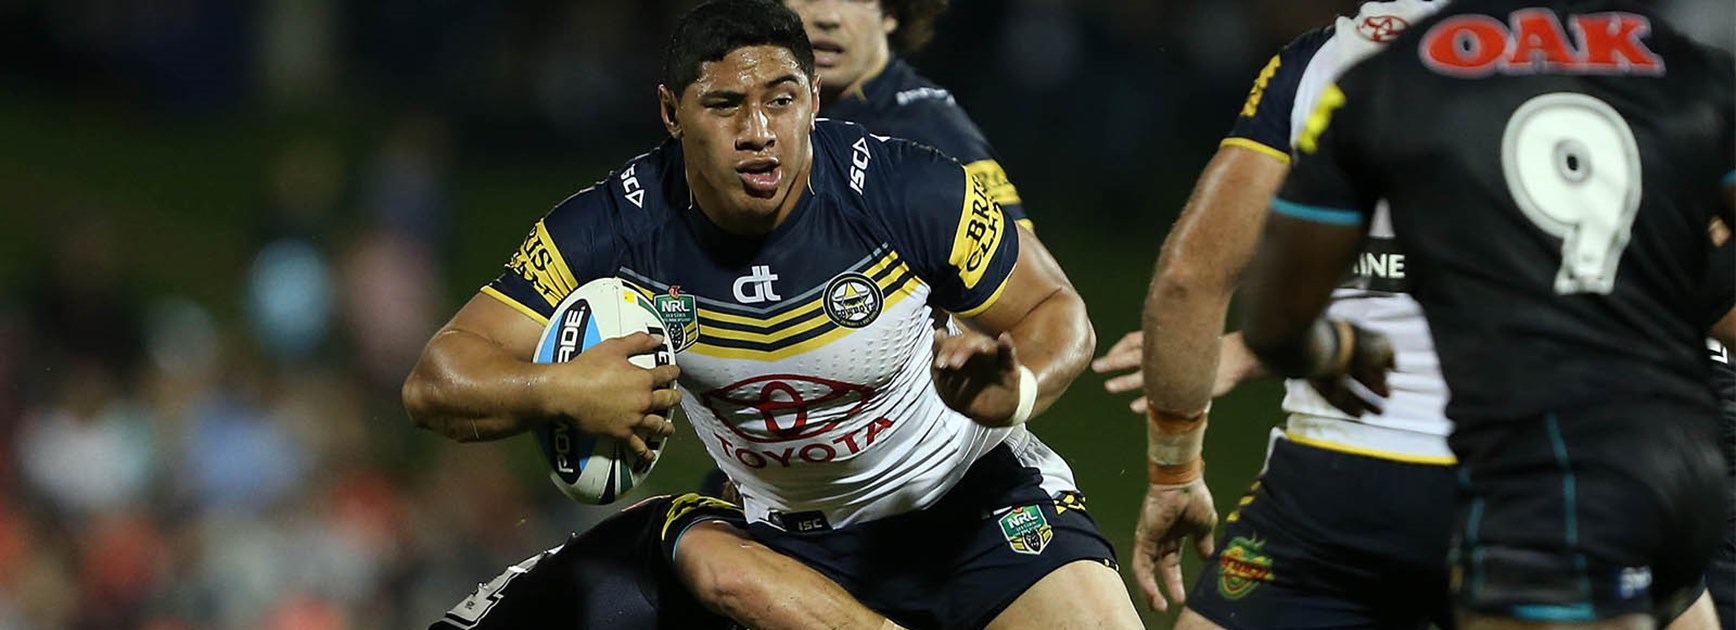 Jason Taumalolo charges through the Panthers defence at Pepper Stadium in Round 5.